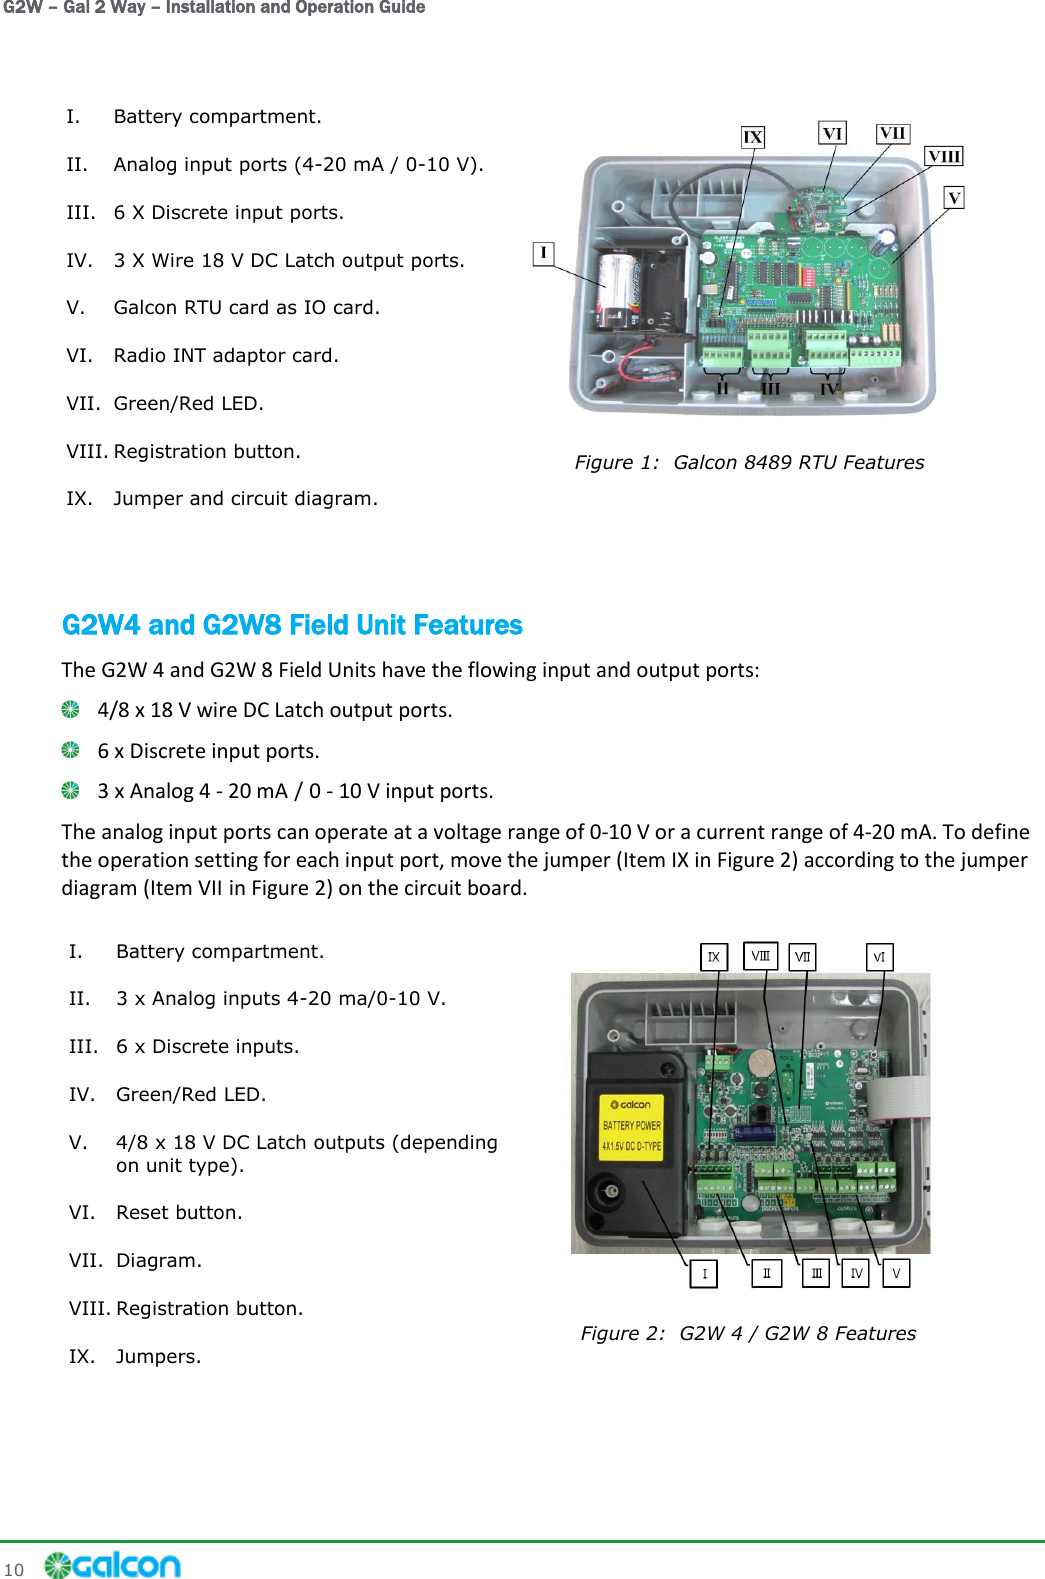 G2W – Gal 2 Way – Installation and Operation Guide 10     I. Battery compartment. II. Analog input ports (4-20 mA / 0-10 V). III. 6 X Discrete input ports. IV. 3 X Wire 18 V DC Latch output ports. V. Galcon RTU card as IO card. VI. Radio INT adaptor card. VII. Green/Red LED. VIII. Registration button. IX. Jumper and circuit diagram.   Figure 1:  Galcon 8489 RTU Features G2W4 and G2W8 Field Unit Features The G2W 4 and G2W 8 Field Units have the flowing input and output ports:  4/8 x 18 V wire DC Latch output ports.   6 x Discrete input ports.   3 x Analog 4 - 20 mA / 0 - 10 V input ports. The analog input ports can operate at a voltage range of 0-10 V or a current range of 4-20 mA. To define the operation setting for each input port, move the jumper (Item IX in Figure 2) according to the jumper diagram (Item VII in Figure 2) on the circuit board. I. Battery compartment. II. 3 x Analog inputs 4-20 ma/0-10 V. III. 6 x Discrete inputs. IV. Green/Red LED. V. 4/8 x 18 V DC Latch outputs (depending on unit type). VI. Reset button. VII. Diagram. VIII. Registration button. IX. Jumpers.   Figure 2:  G2W 4 / G2W 8 Features 